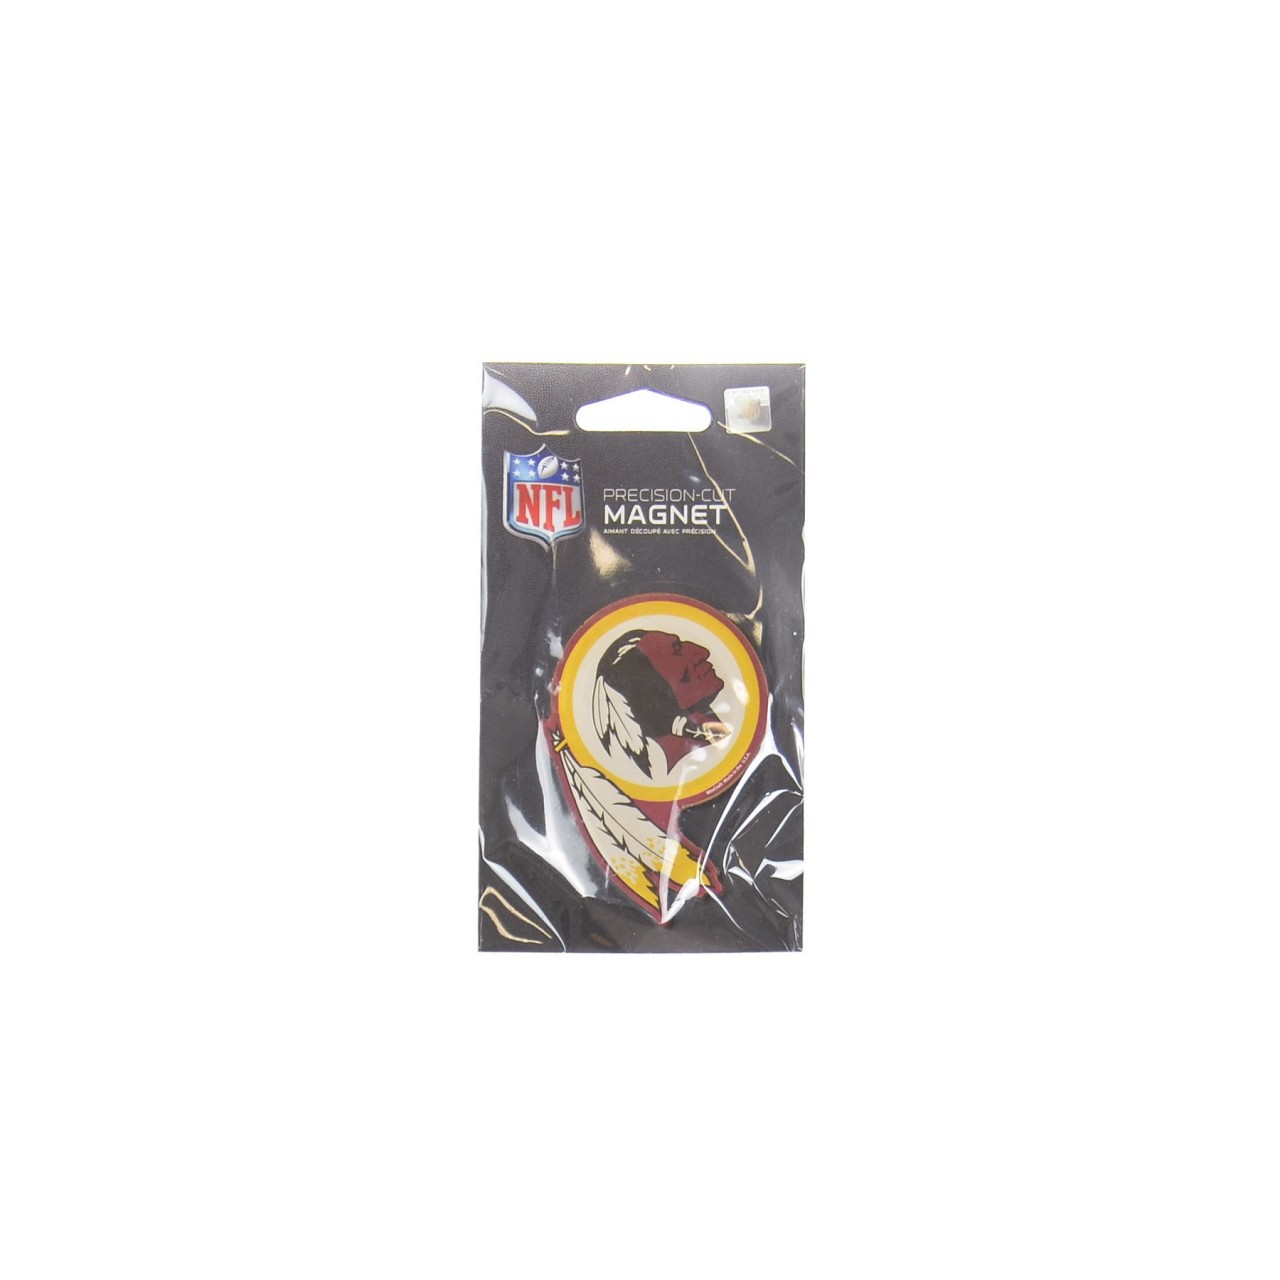 WINCRAFT NFL MAGNET LOGO WASRED 100032085206657